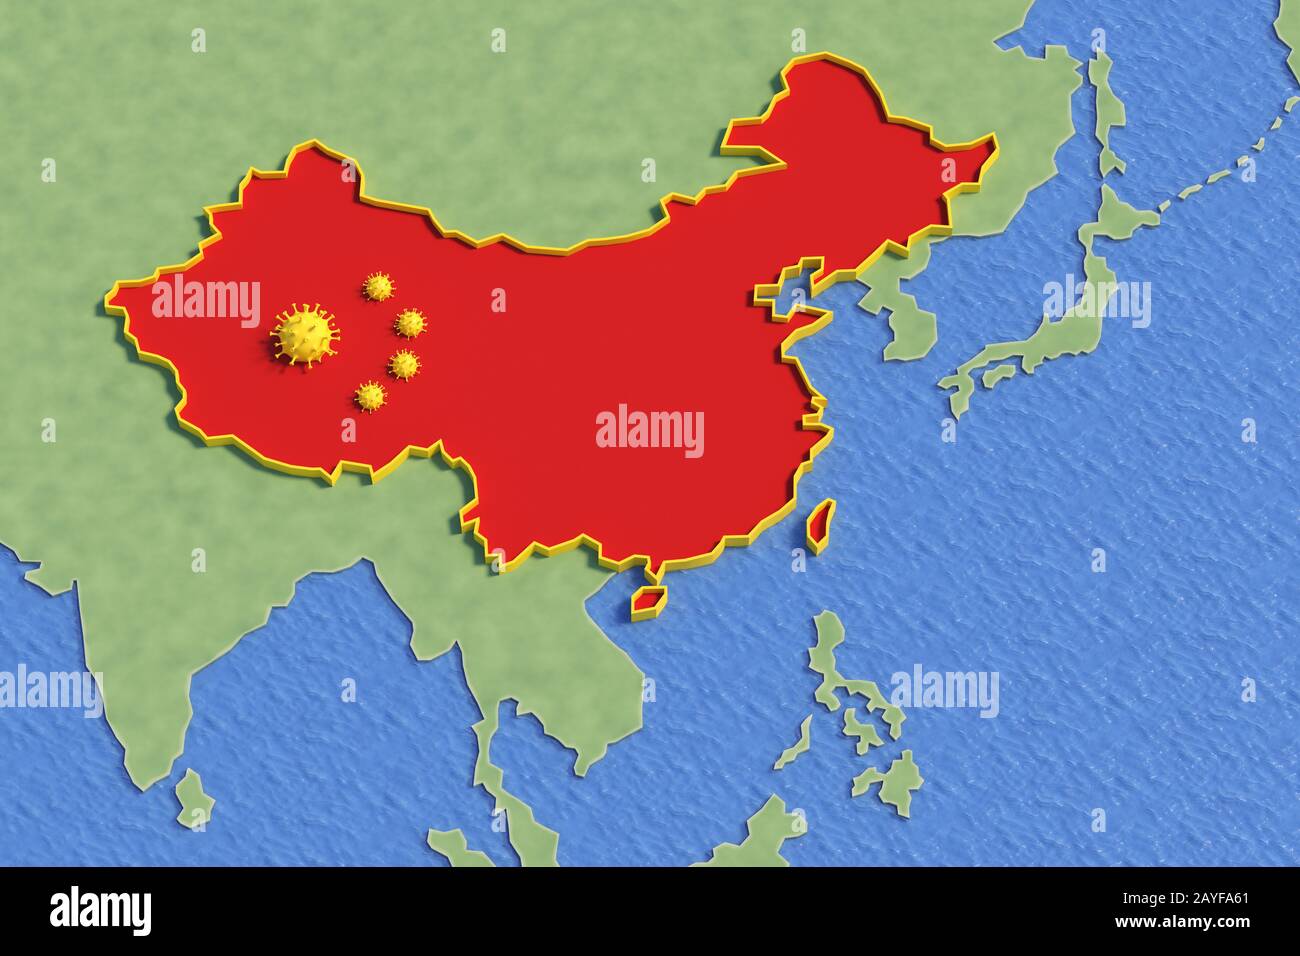 Map Republic Of China Isolated Of The Rest Of The World Because Of The Coronavirus That Is Represented As China Flag Concept 3d Illustration Stock Photo Alamy